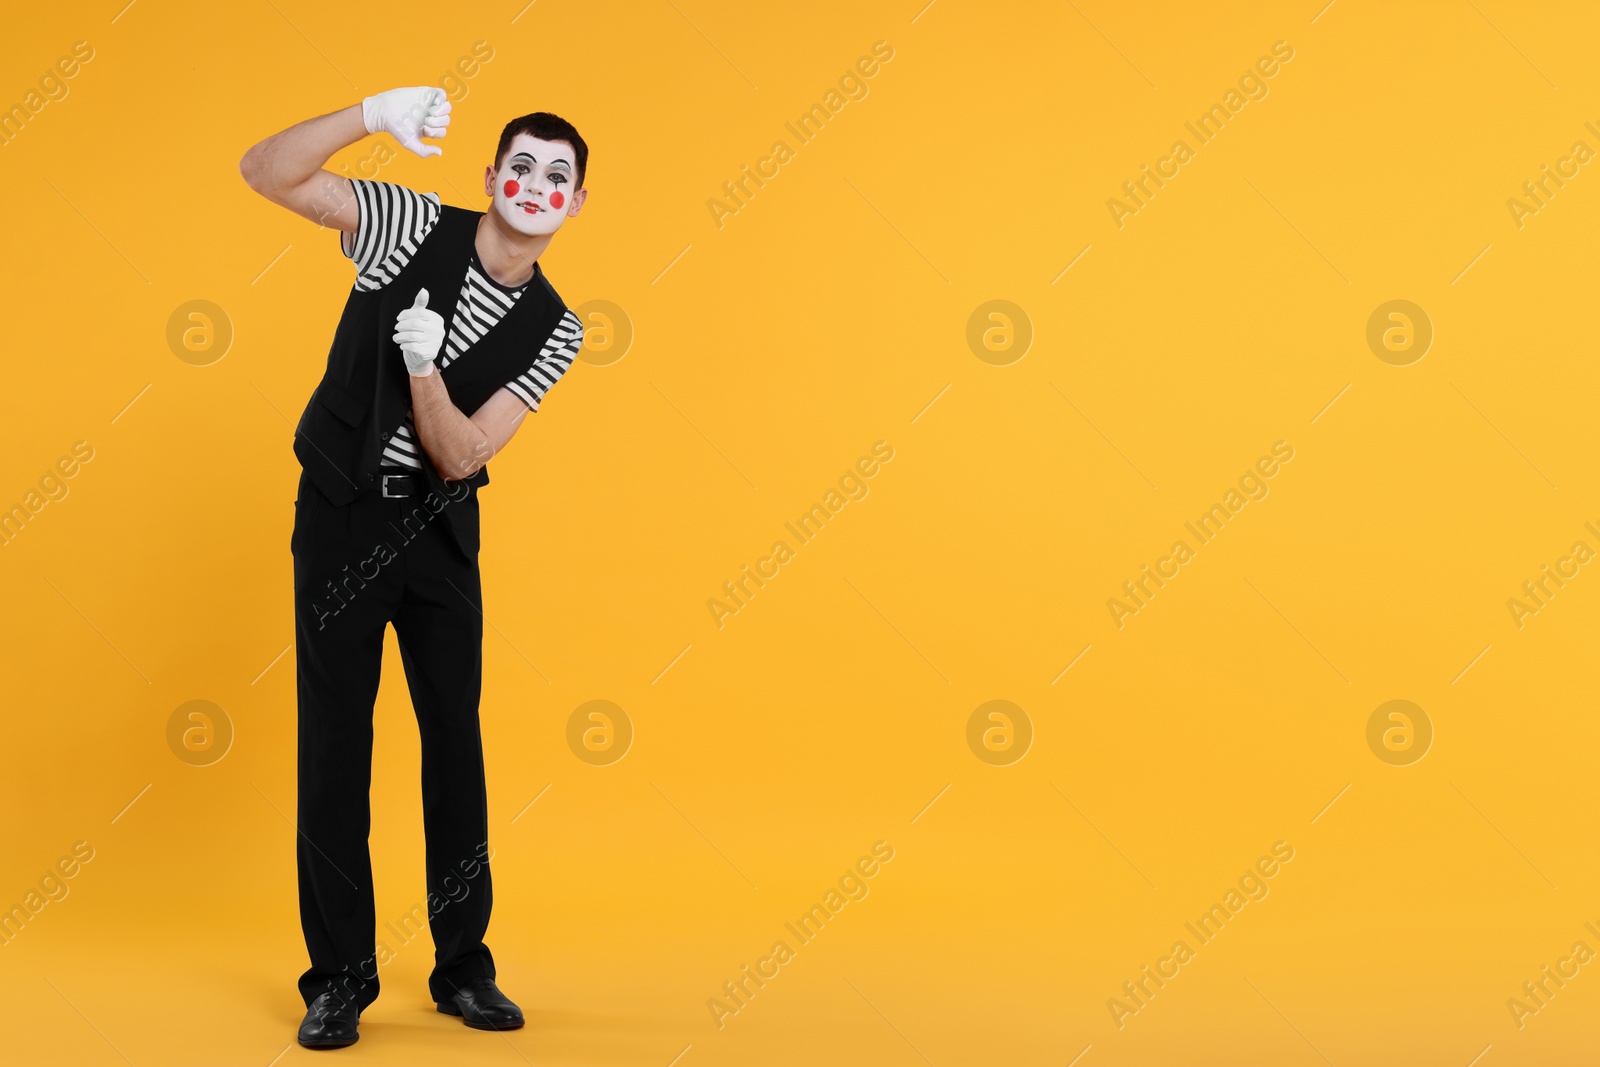 Photo of Funny mime artist posing on orange background. Space for text